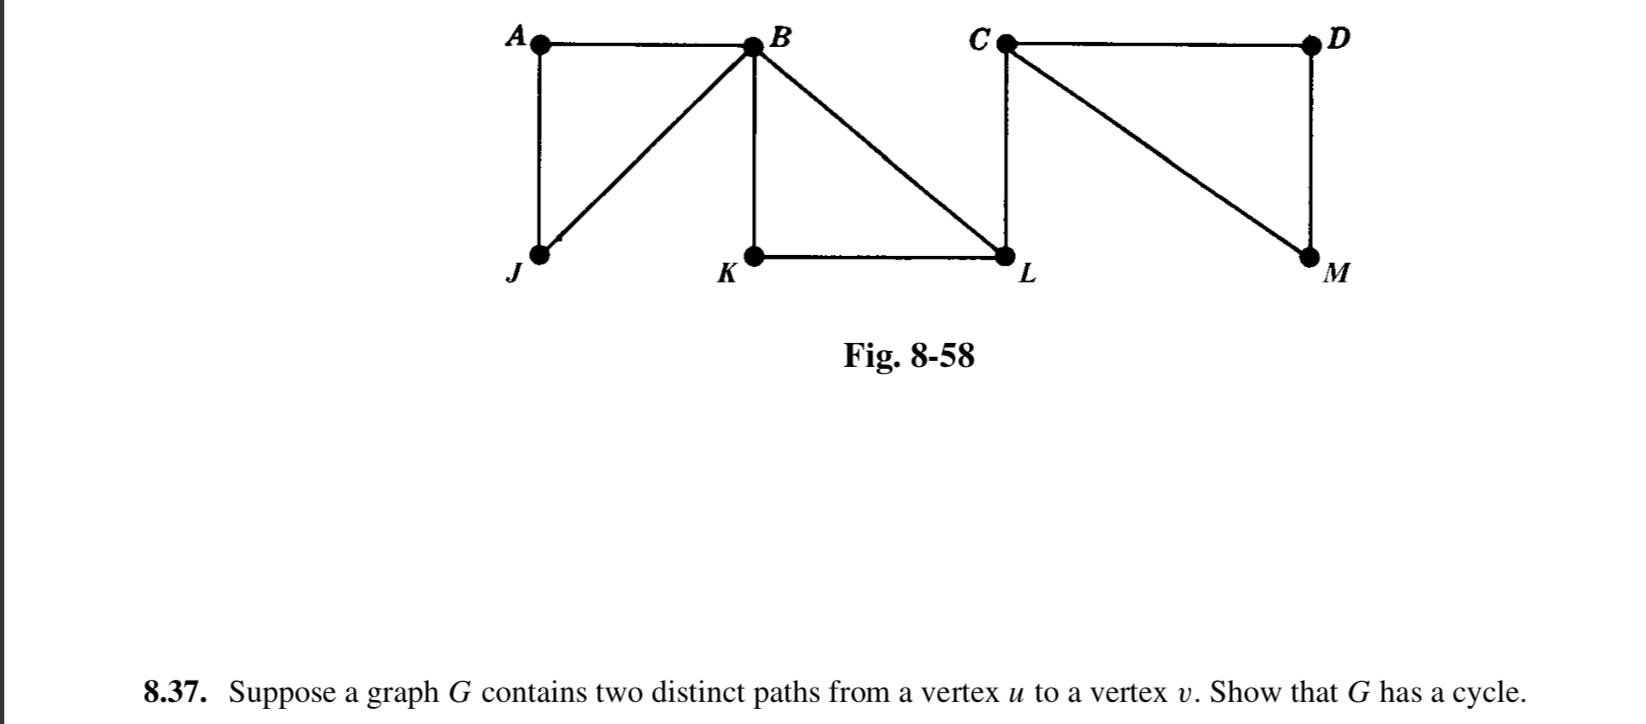 Suppose a graph G contains two distinct paths from a vertex u to a vertex v. Show that G has a cycle.
